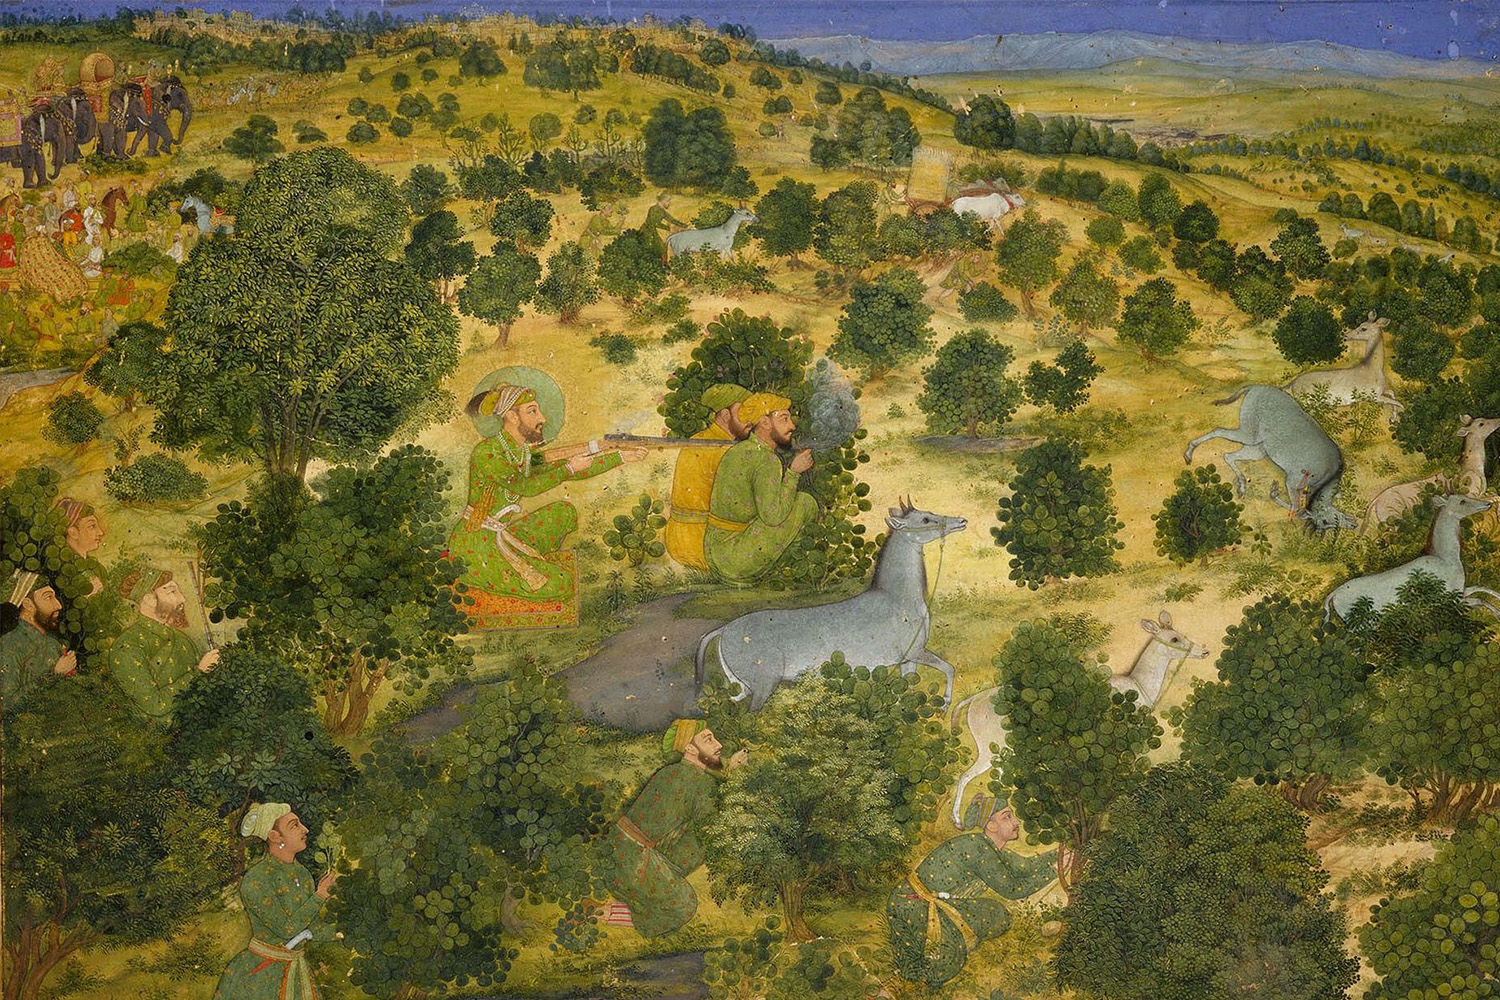 A painting depicting Aurangzeb in the centre, flanked by attendants and hunting nilgais in a grassy landscape.